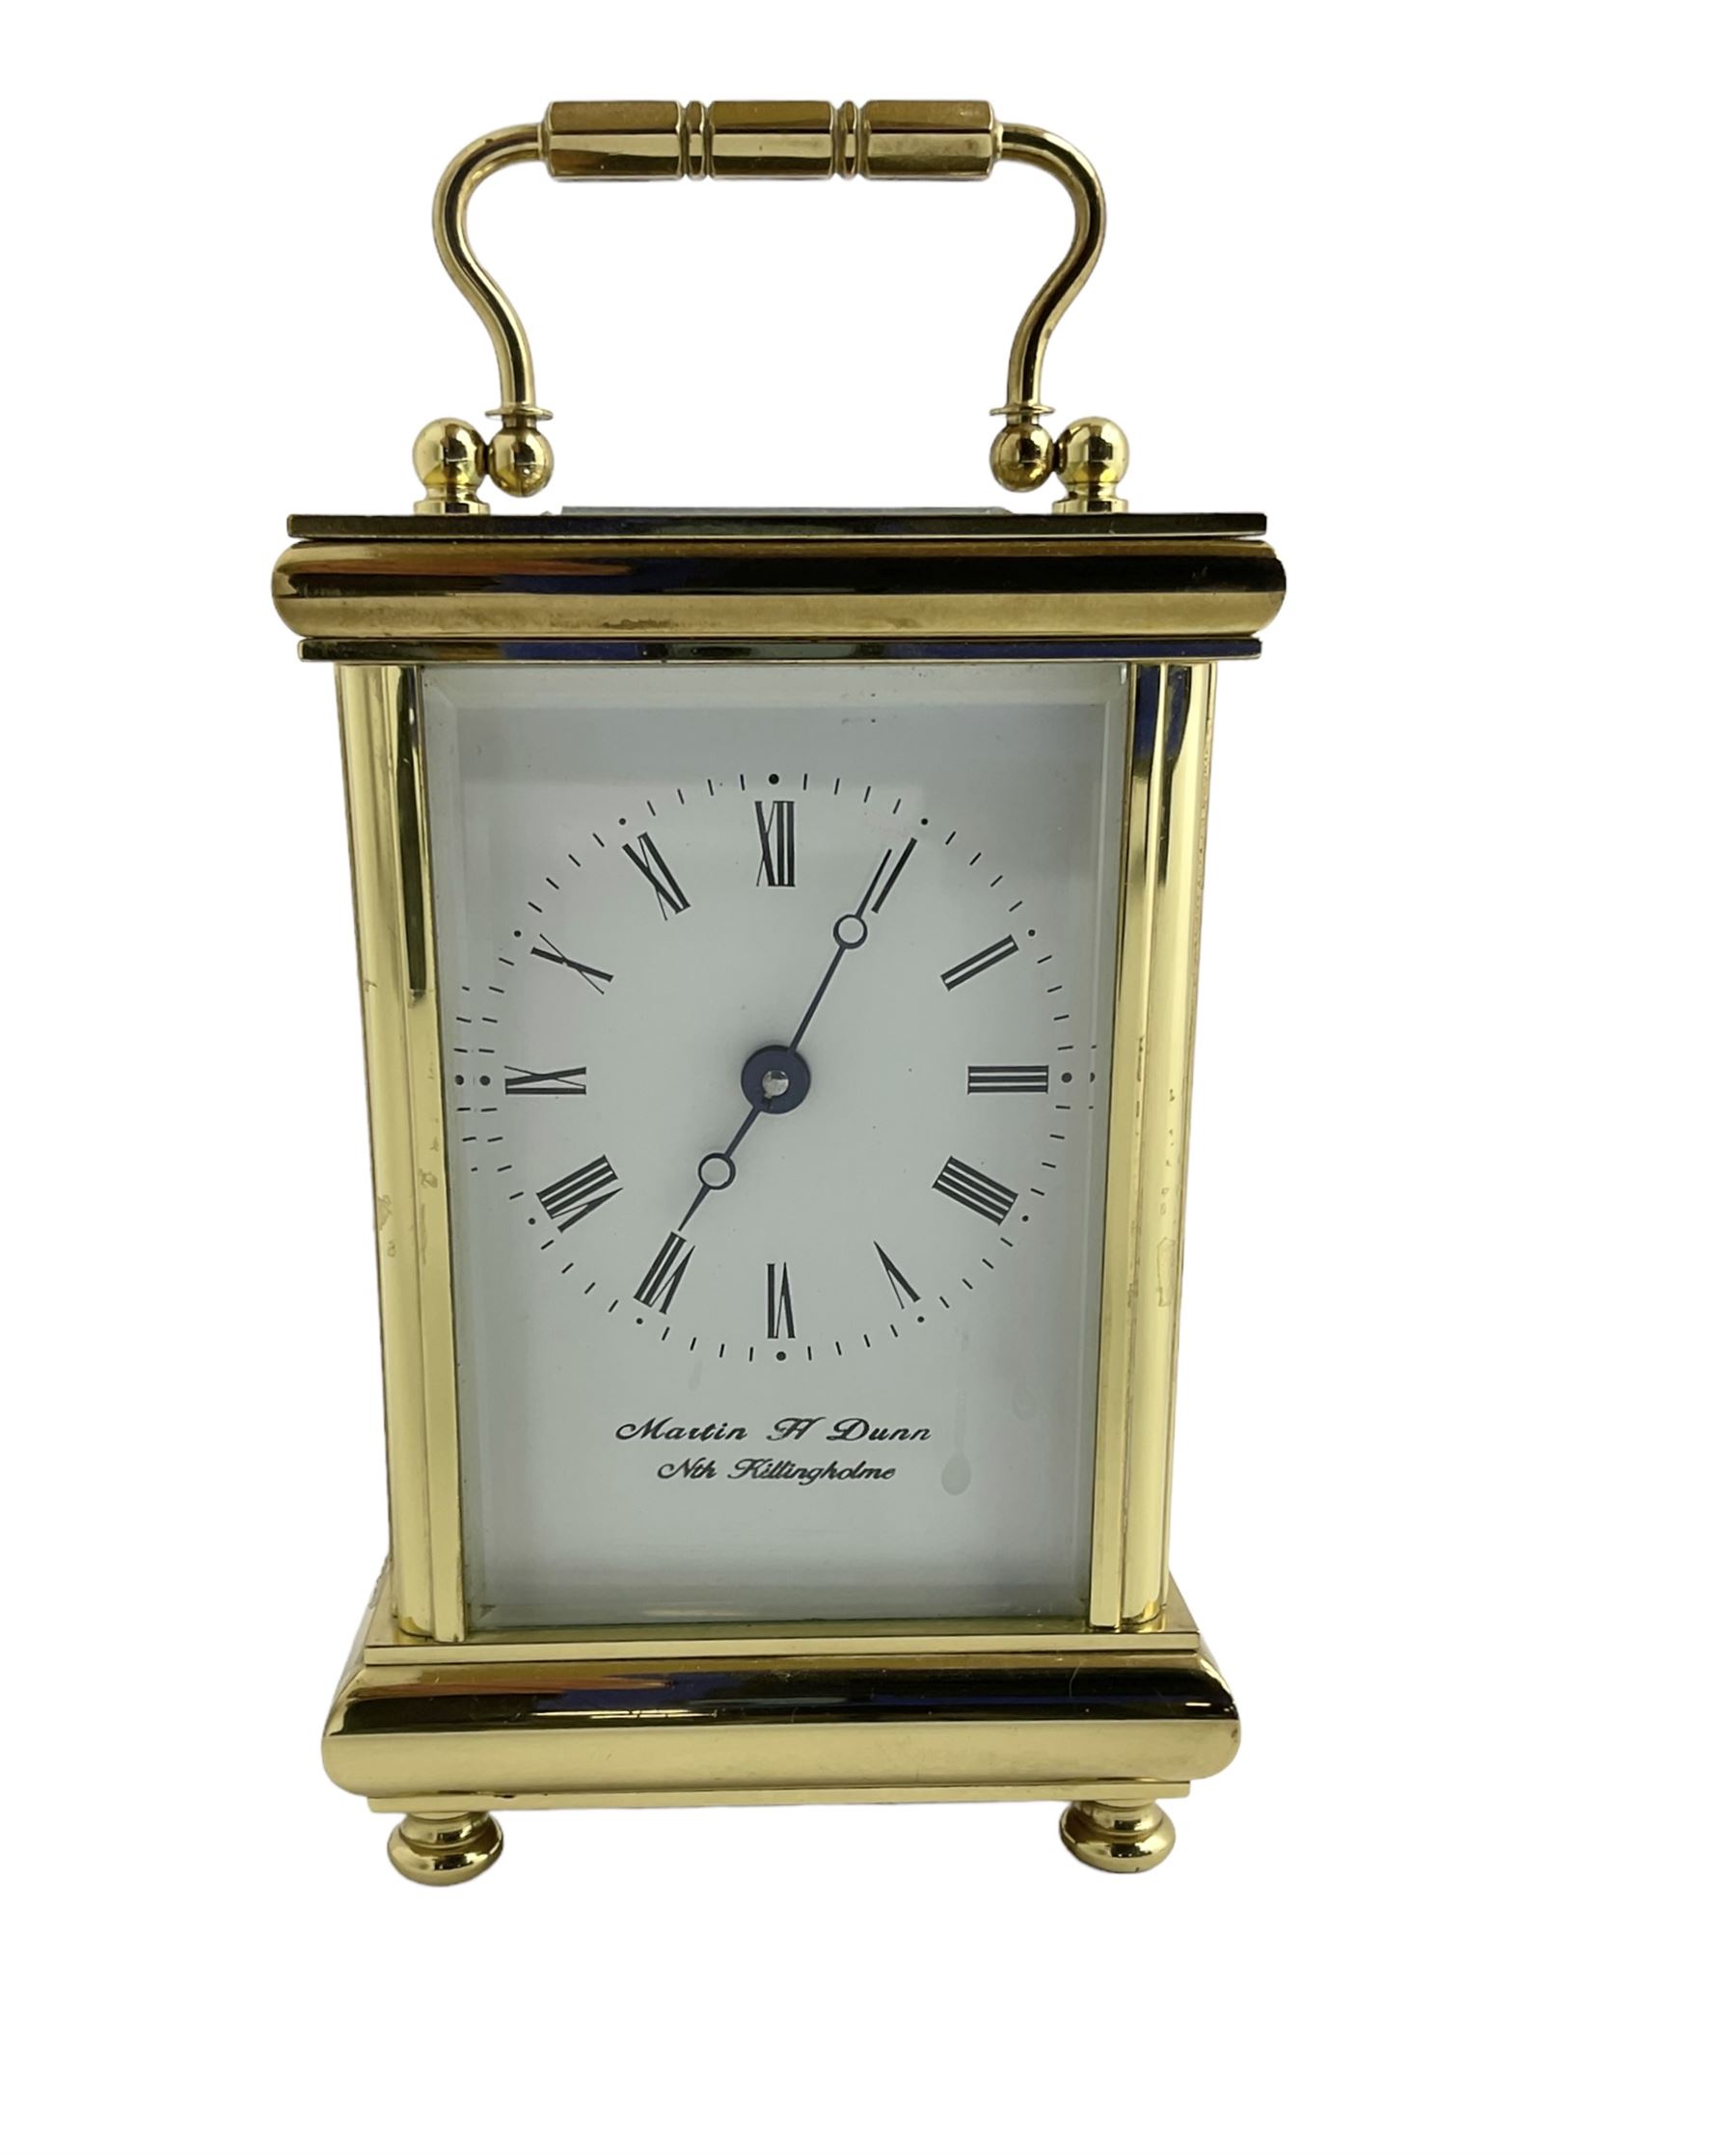 English - contemporary 8-day carriage clock retailed by Martin Dunn